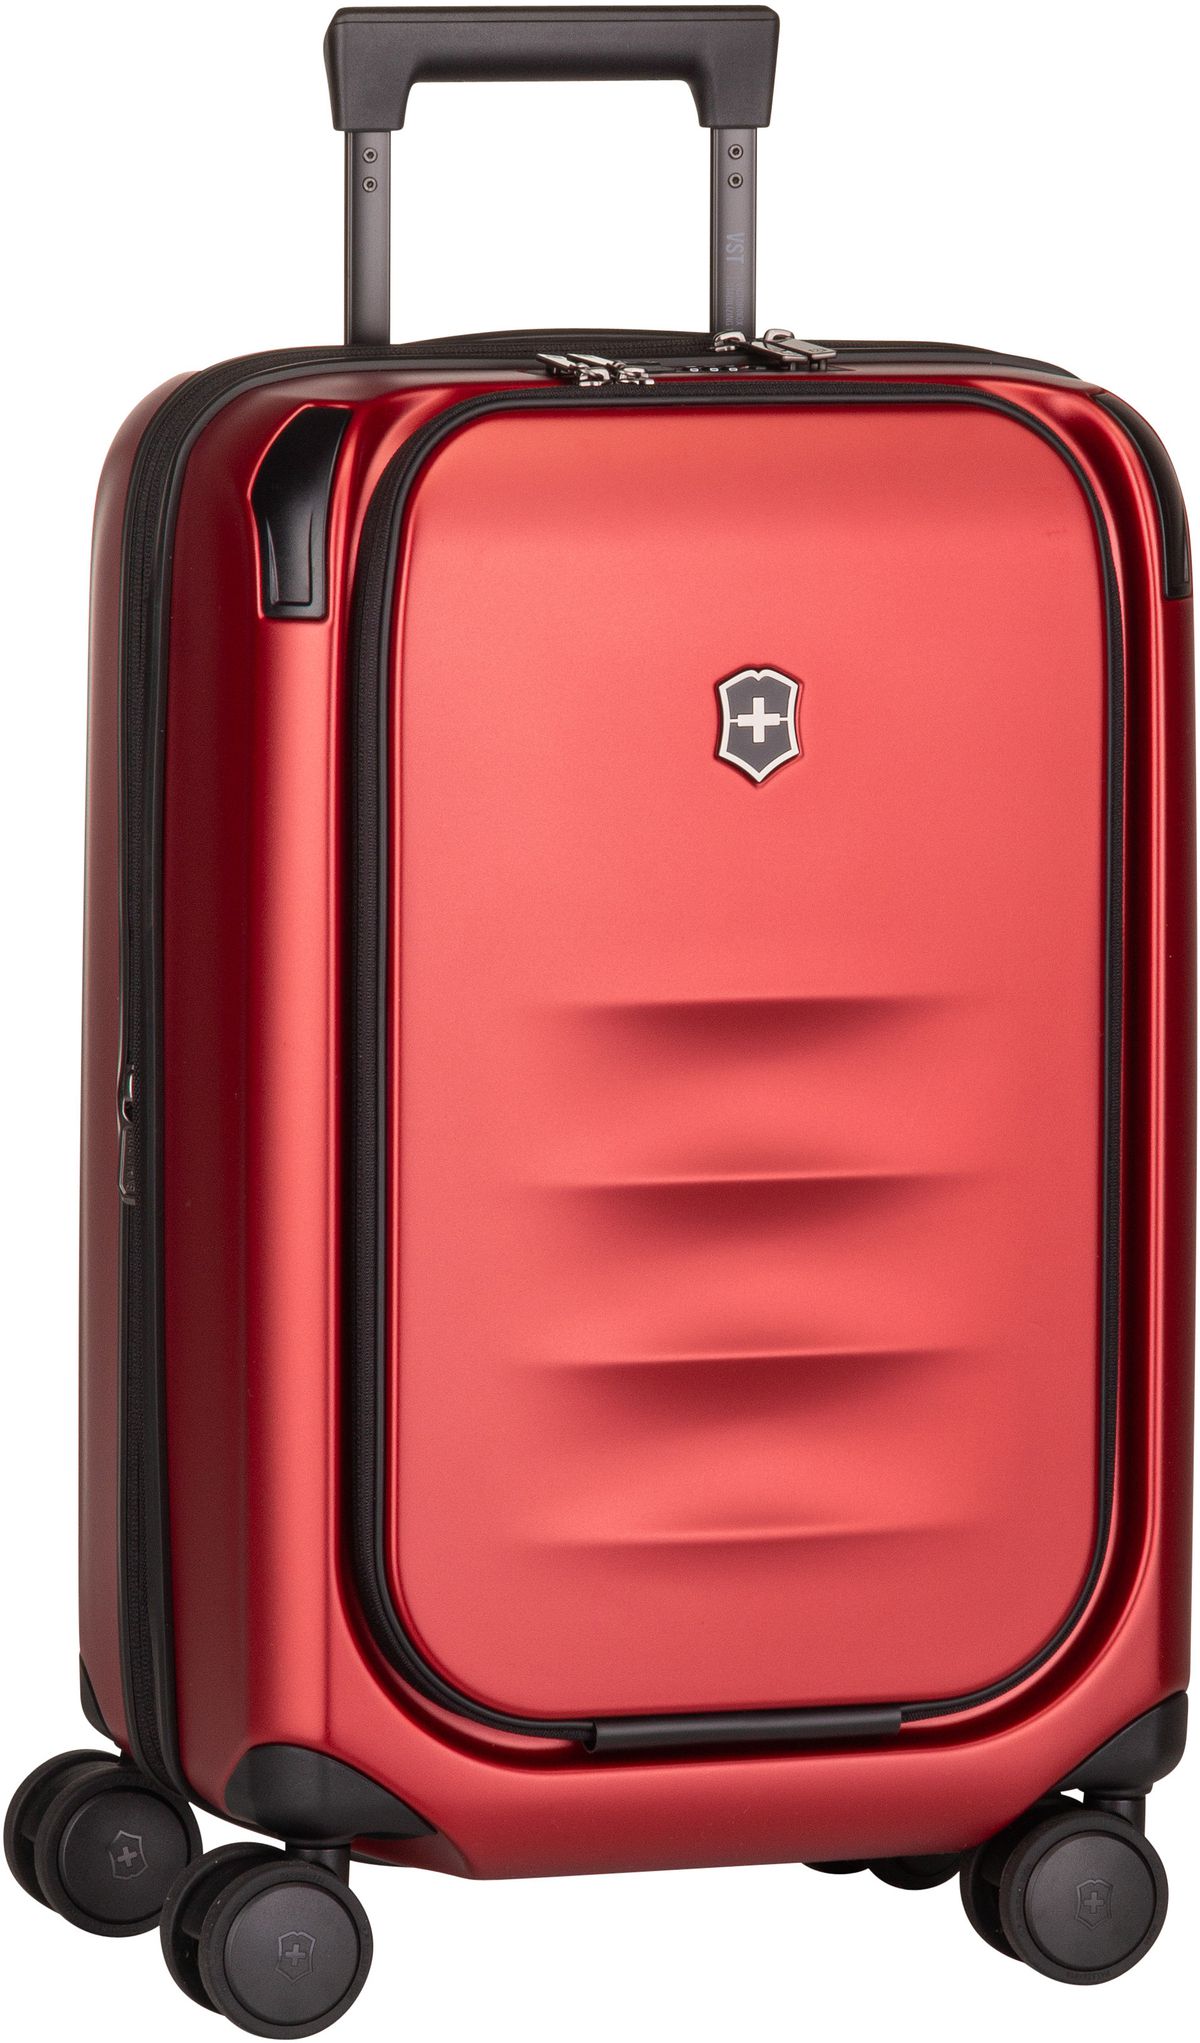 Victorinox Victorinox Spectra 3.0 Exp. Frequent Flyer Carry-On in Rot (37 Liter), Koffer & Trolley